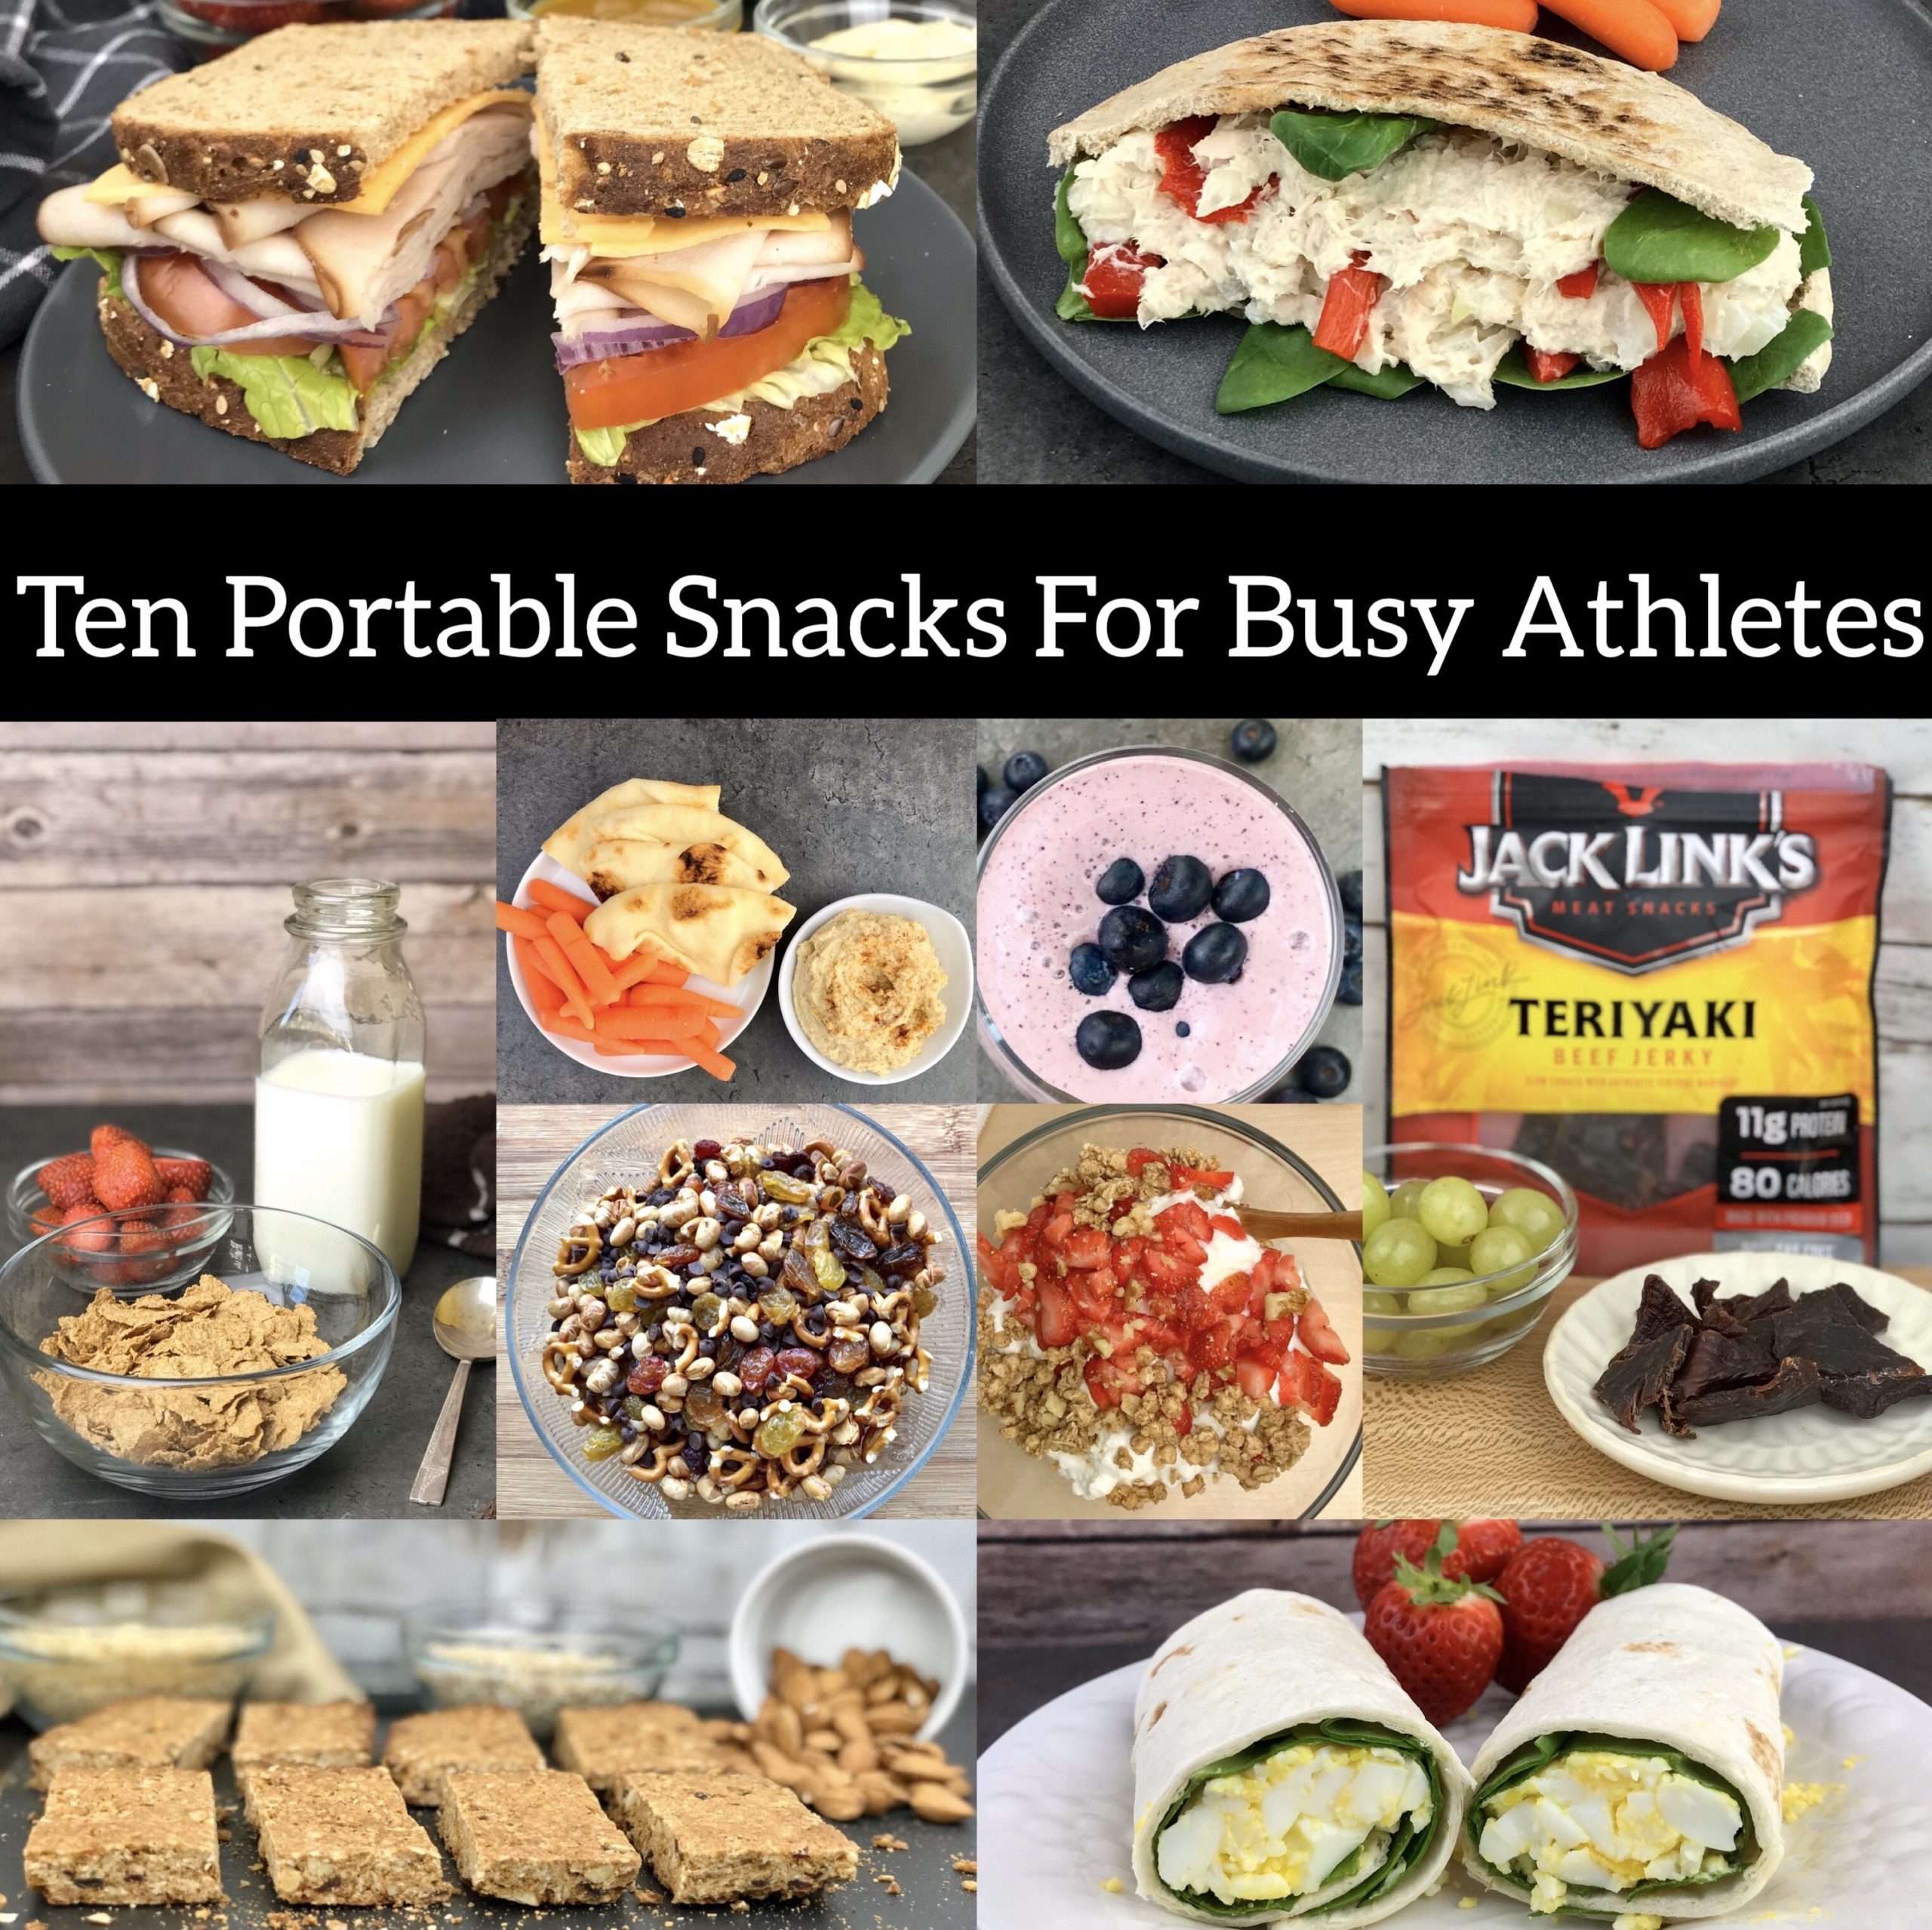 Snacks for on-the-go athletes